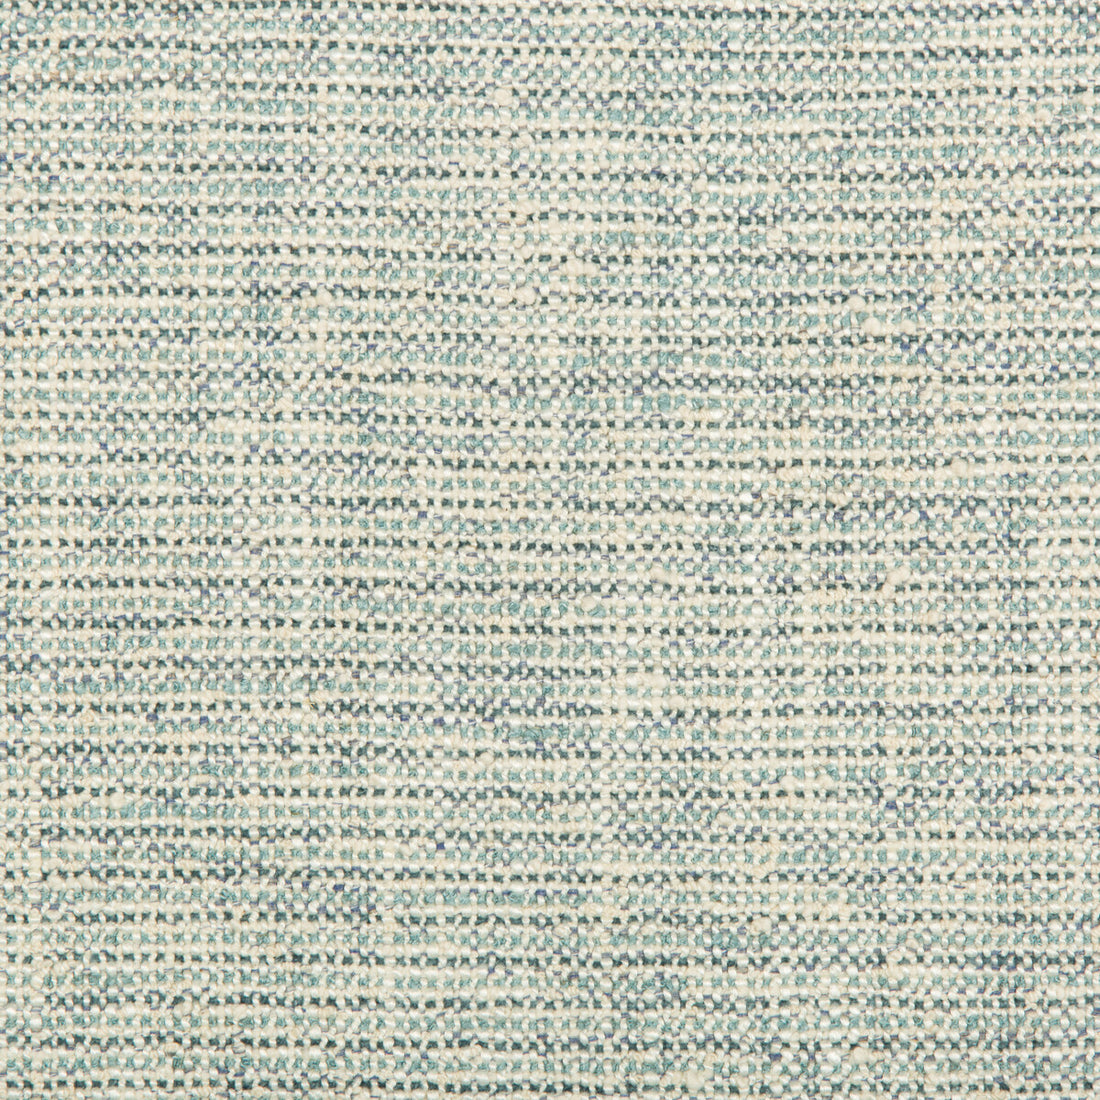 Varona fabric in lagoon color - pattern 2017160.153.0 - by Lee Jofa in the Westport collection